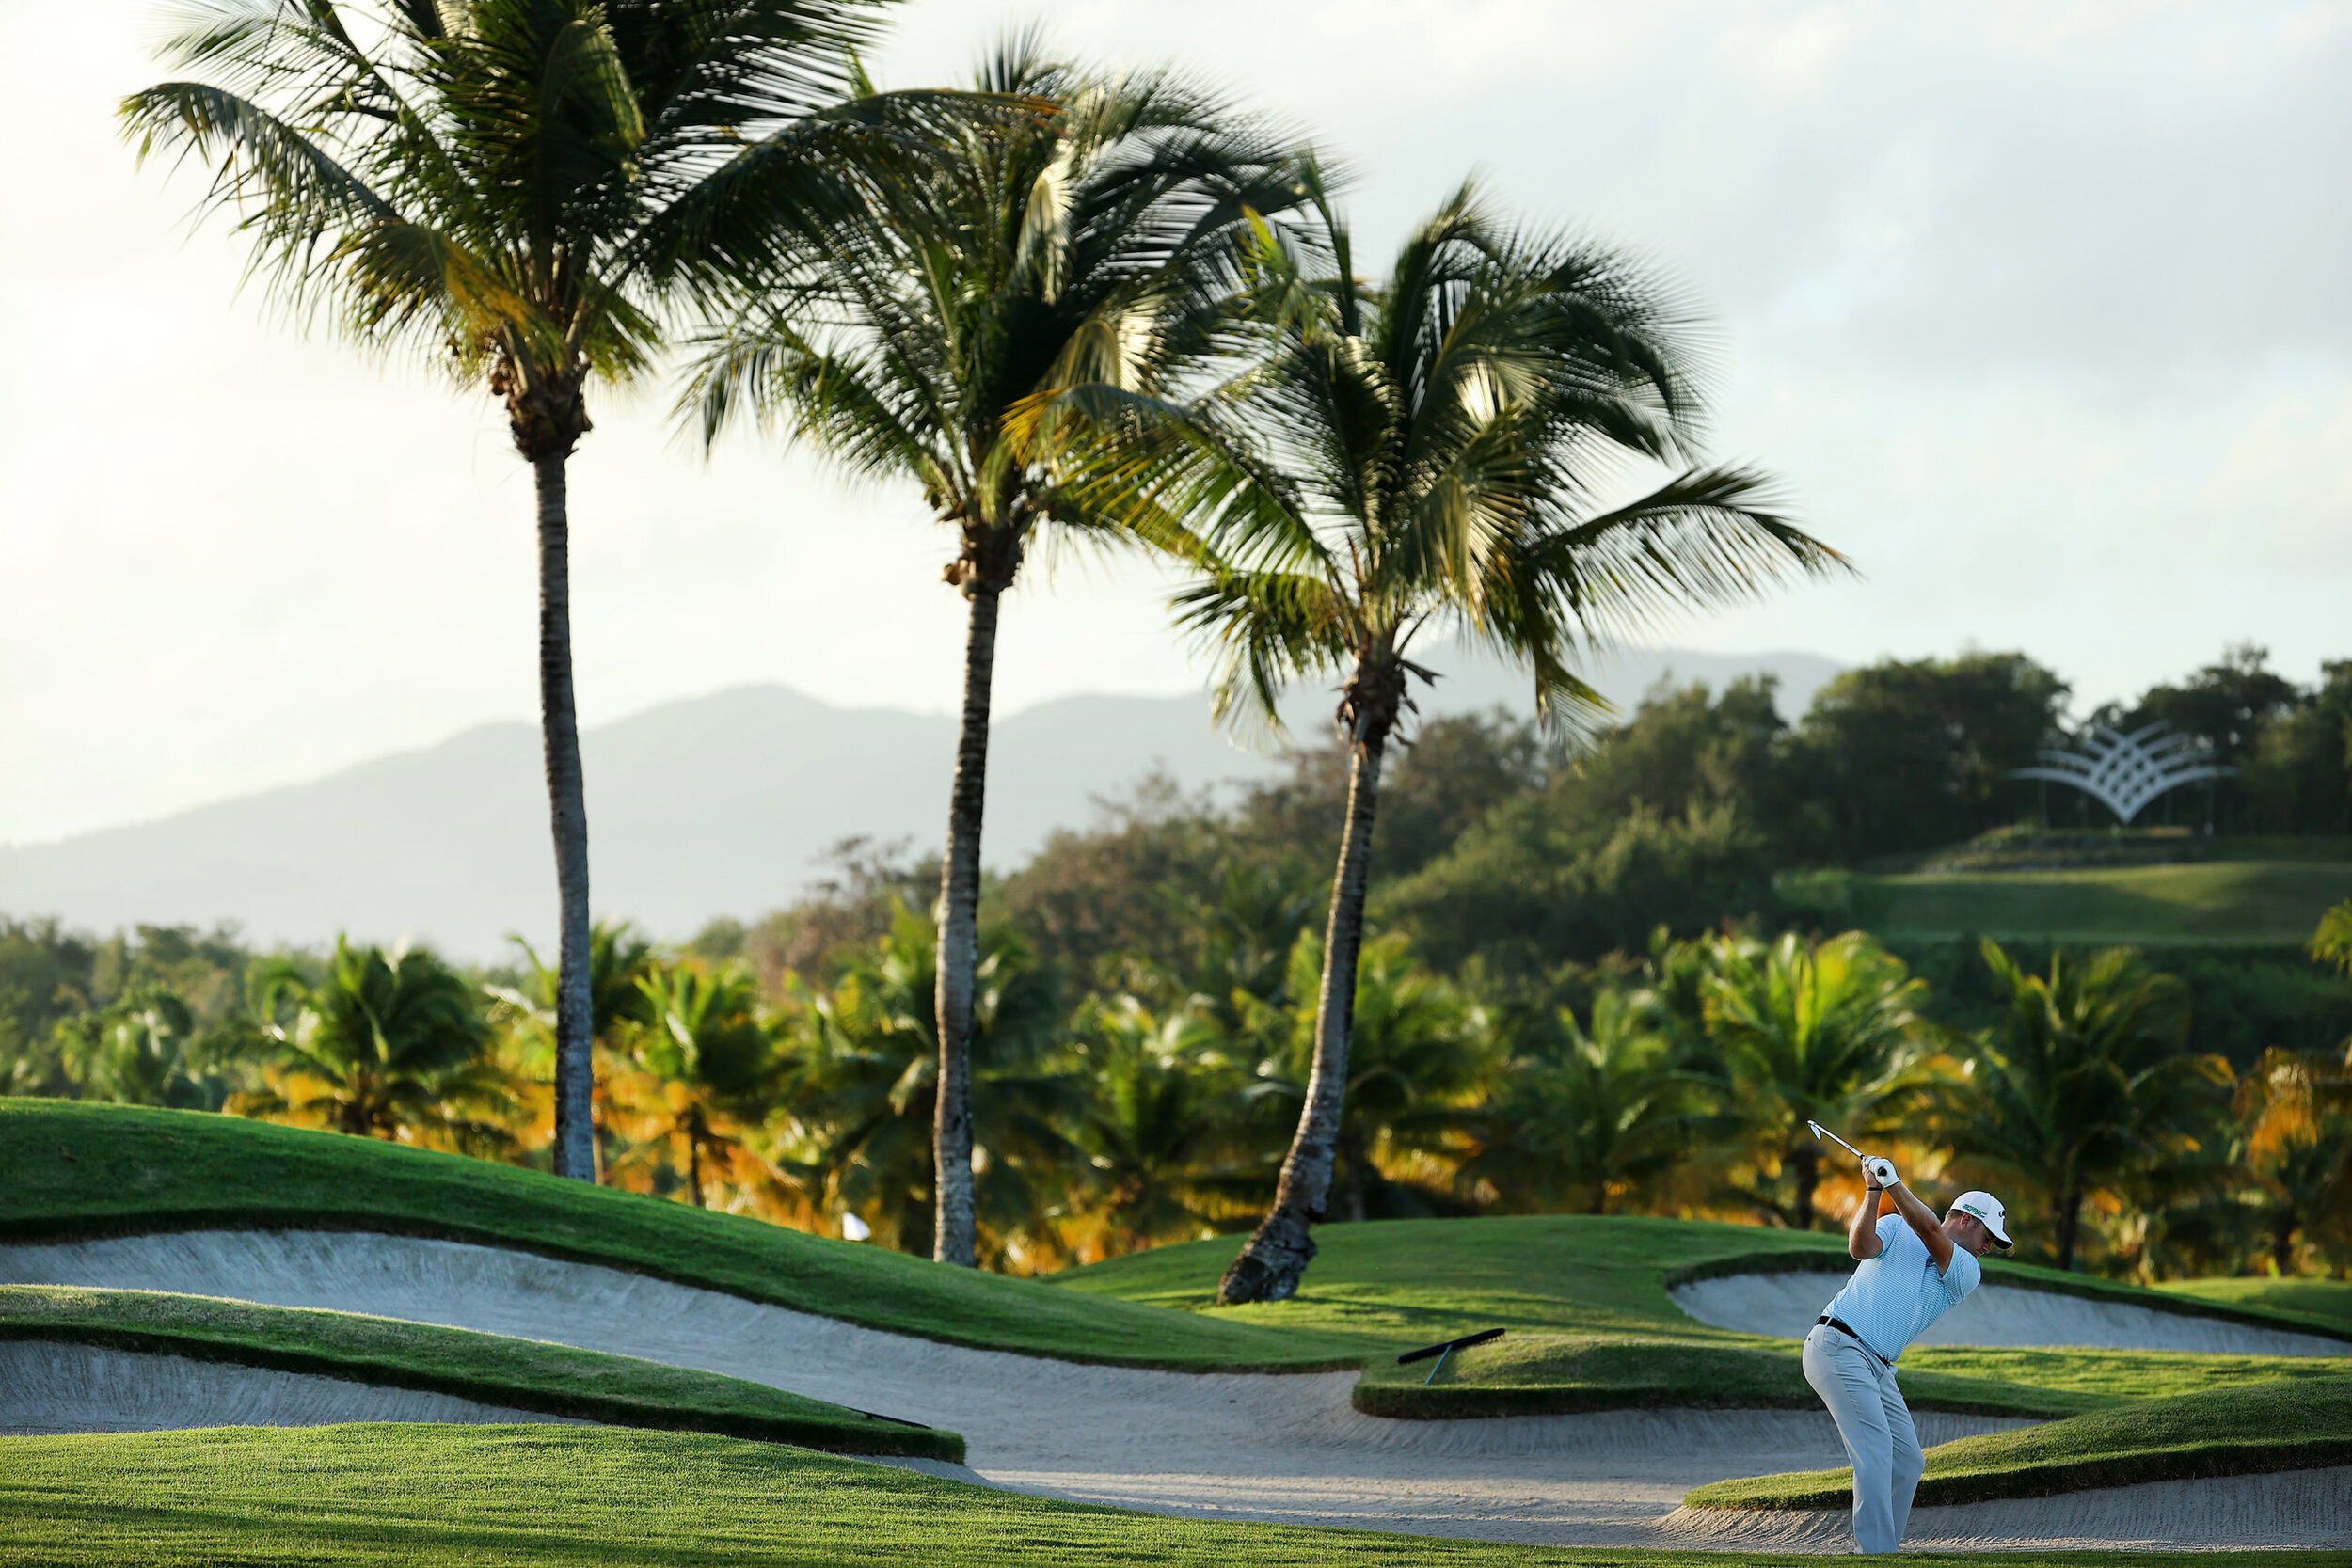  RIO GRANDE, PUERTO RICO - FEBRUARY 25: Tom Lewis of England plays his second shot on the first hole during the first round of the Puerto Rico Open at Grand Reserve Country Club on February 25, 2021 in Rio Grande, Puerto Rico. (Photo by Andy Lyons/Ge